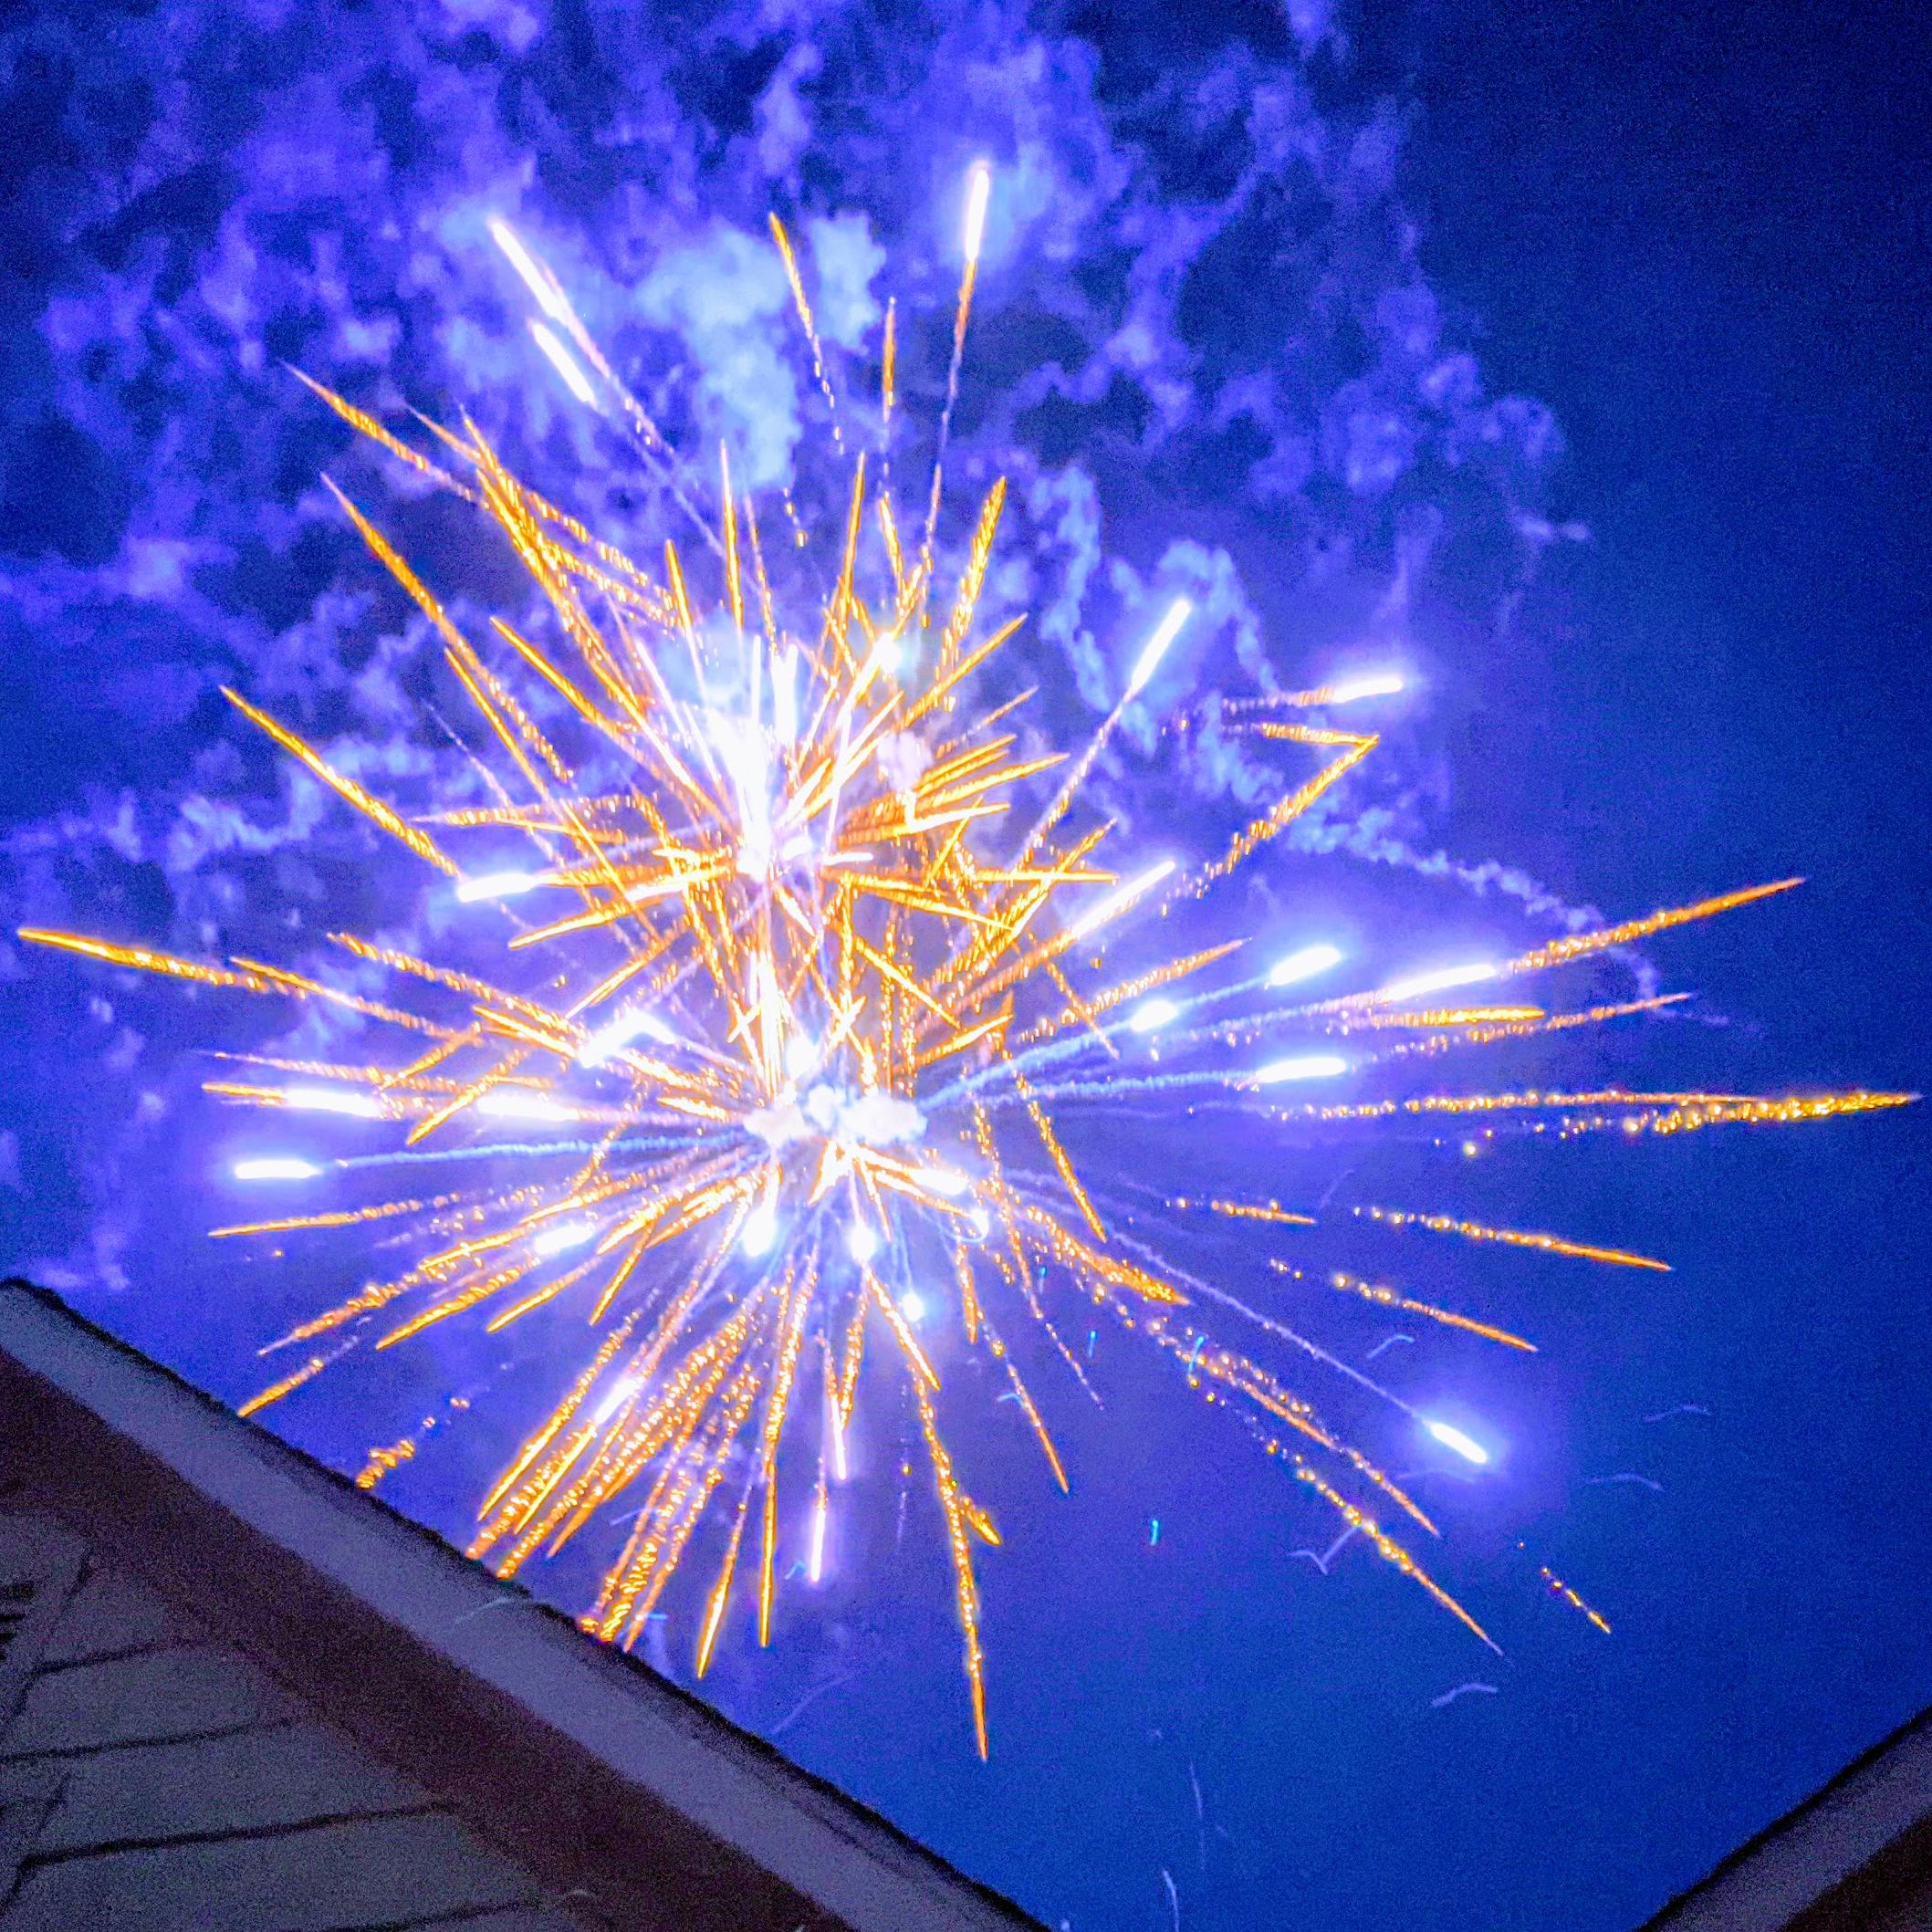 White and yellow fireworks burst in a royal blue night sky above the outline of an American home.